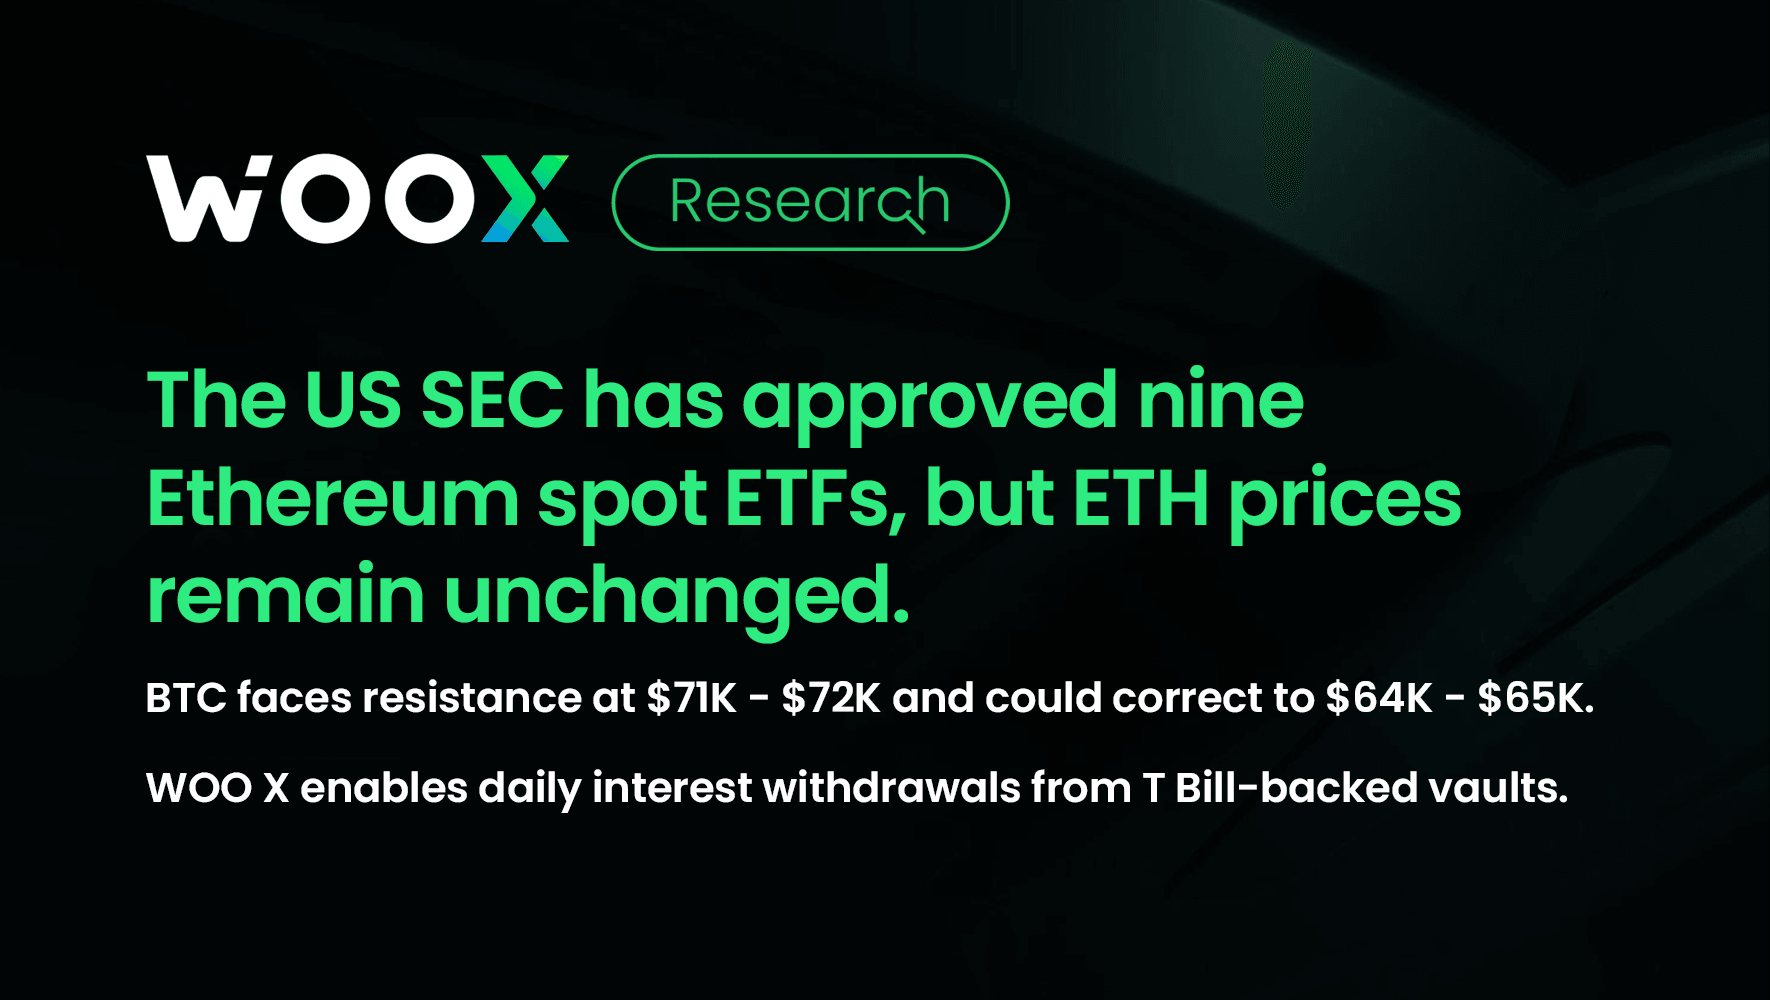 The US SEC has approved nine Ethereum spot ETFs, but ETH prices remain unchanged